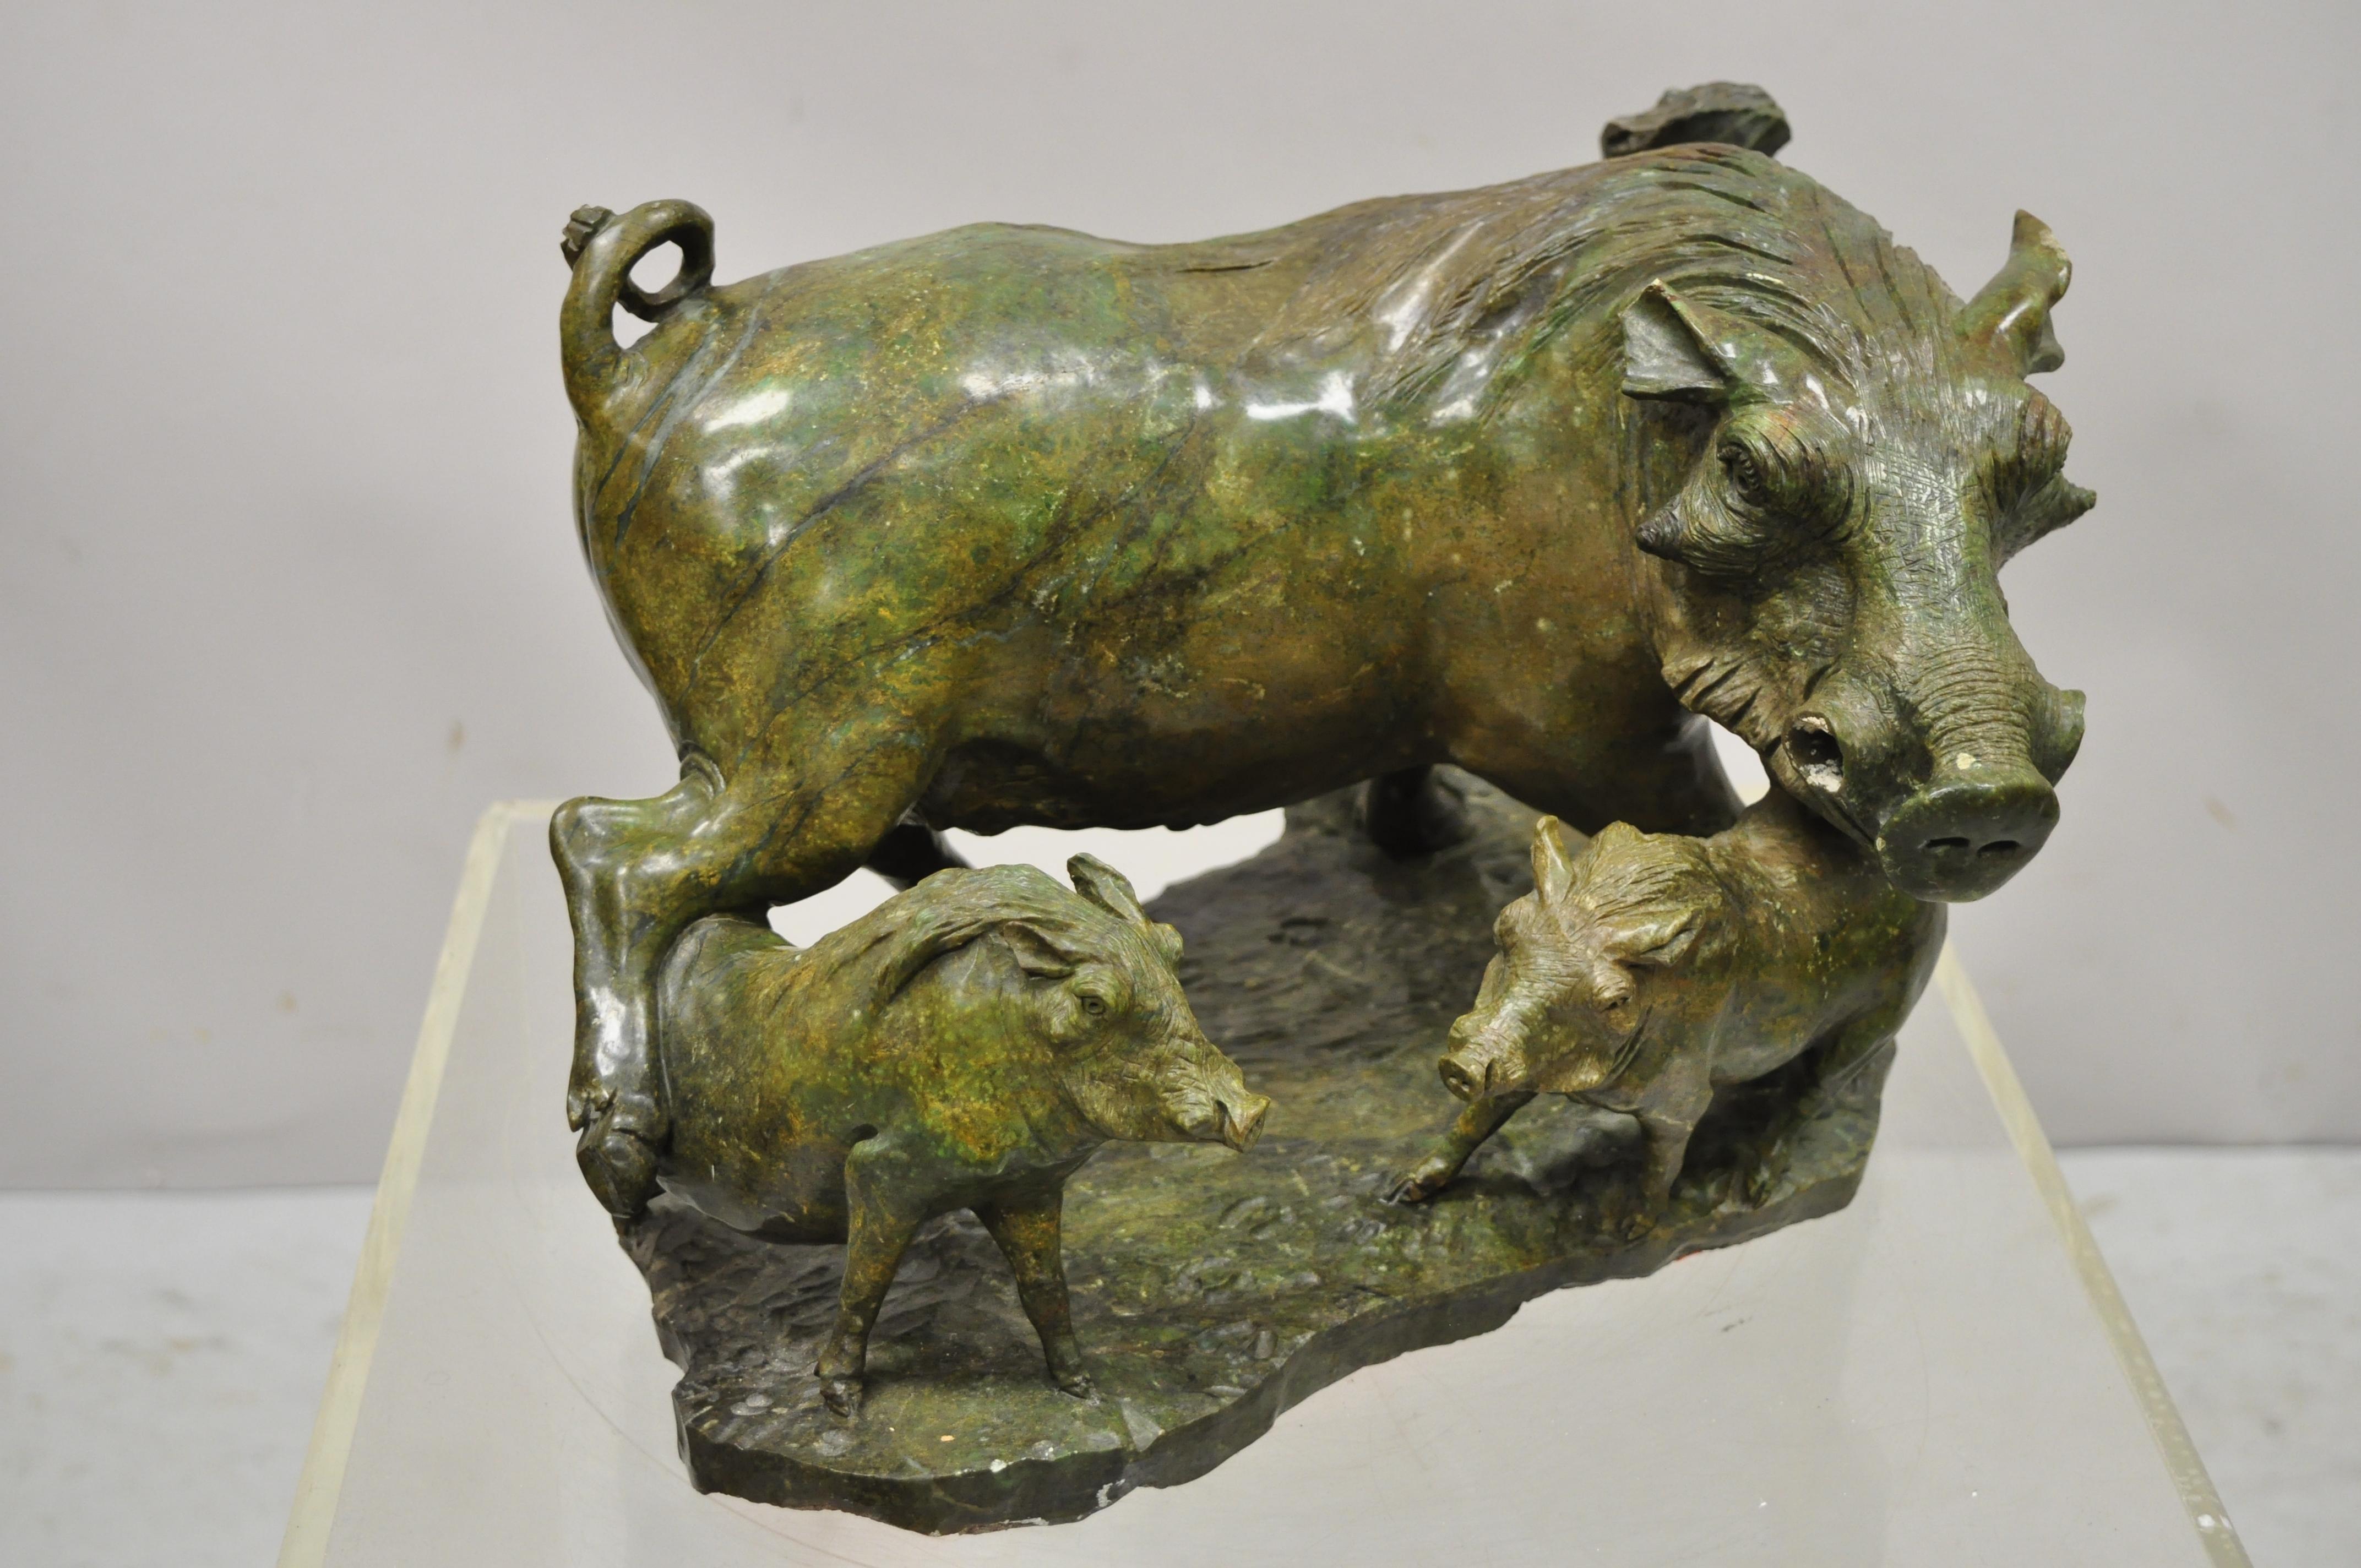 James Tandi African Wild Boar Green Carved Verdite Hardstone sculpture figure. Item features impressive carved verdite hardstone sculpture of a mother wild boar (missing tusks) and 2 young boar, very nice vintage item, quality craftsmanship, great